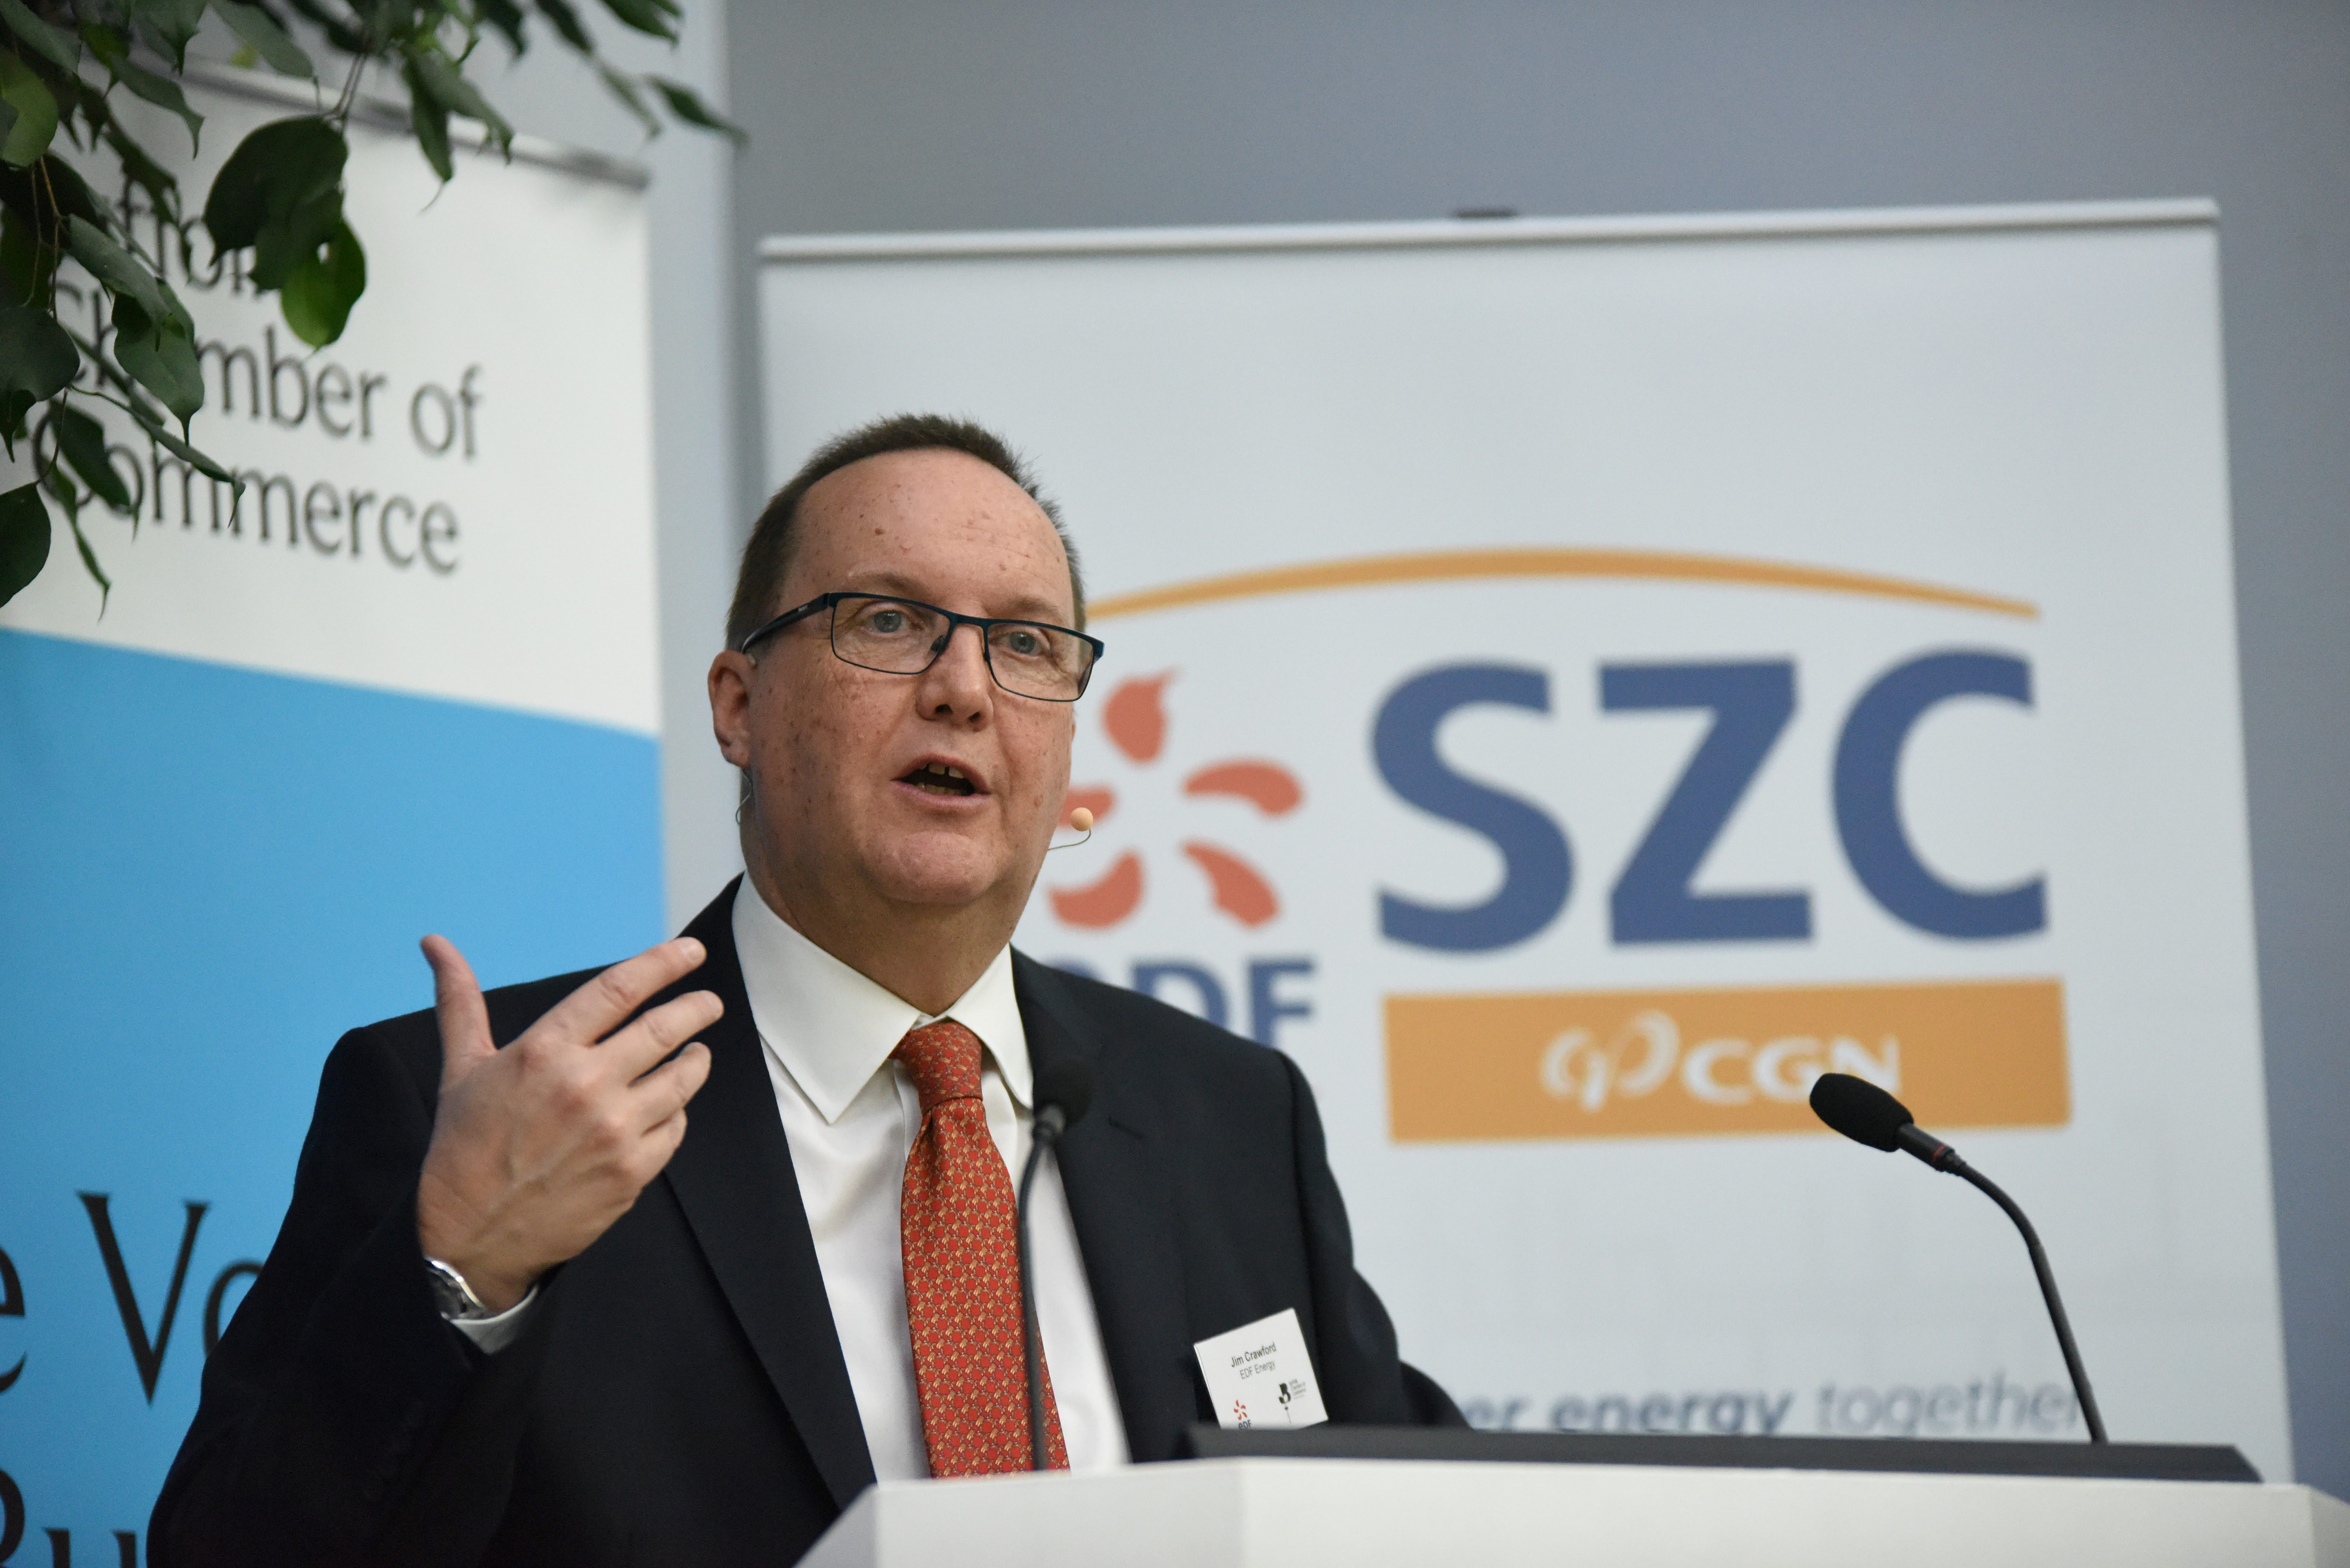 Jim Crawford, Sizewell C project development director speaking at the Suffolk Chamber event - Photo - Spring 